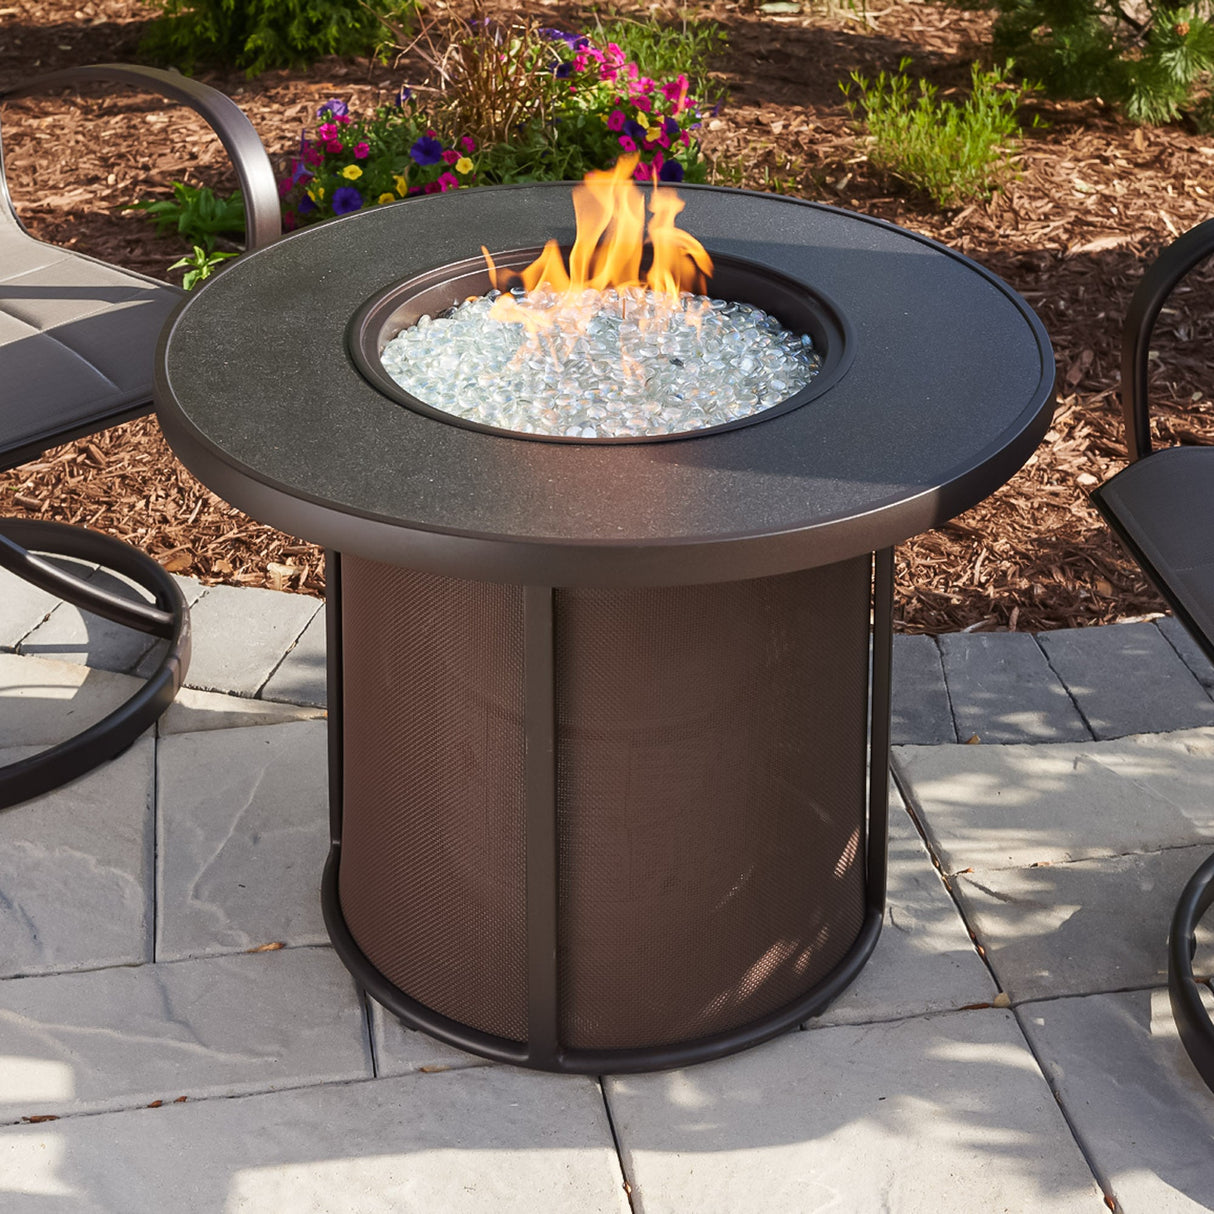 The Brown Stonefire Round Gas Fire Pit Table on a patio setup surrounded by patio furniture